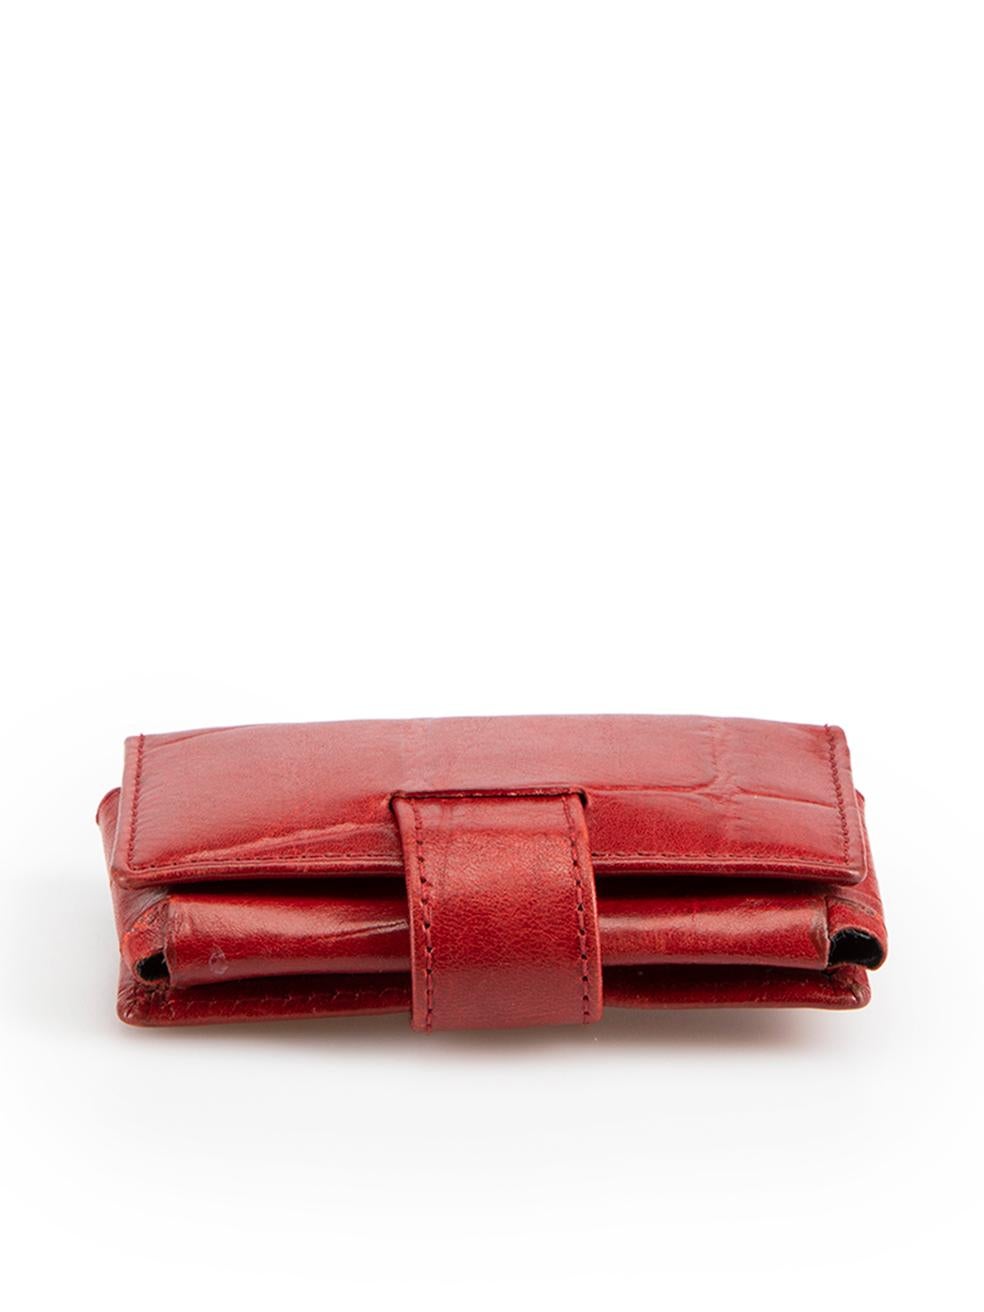 Mulberry Women's Vintage Red Leather Croc Embossed Lipstick Pouch with Mirror In Good Condition For Sale In London, GB